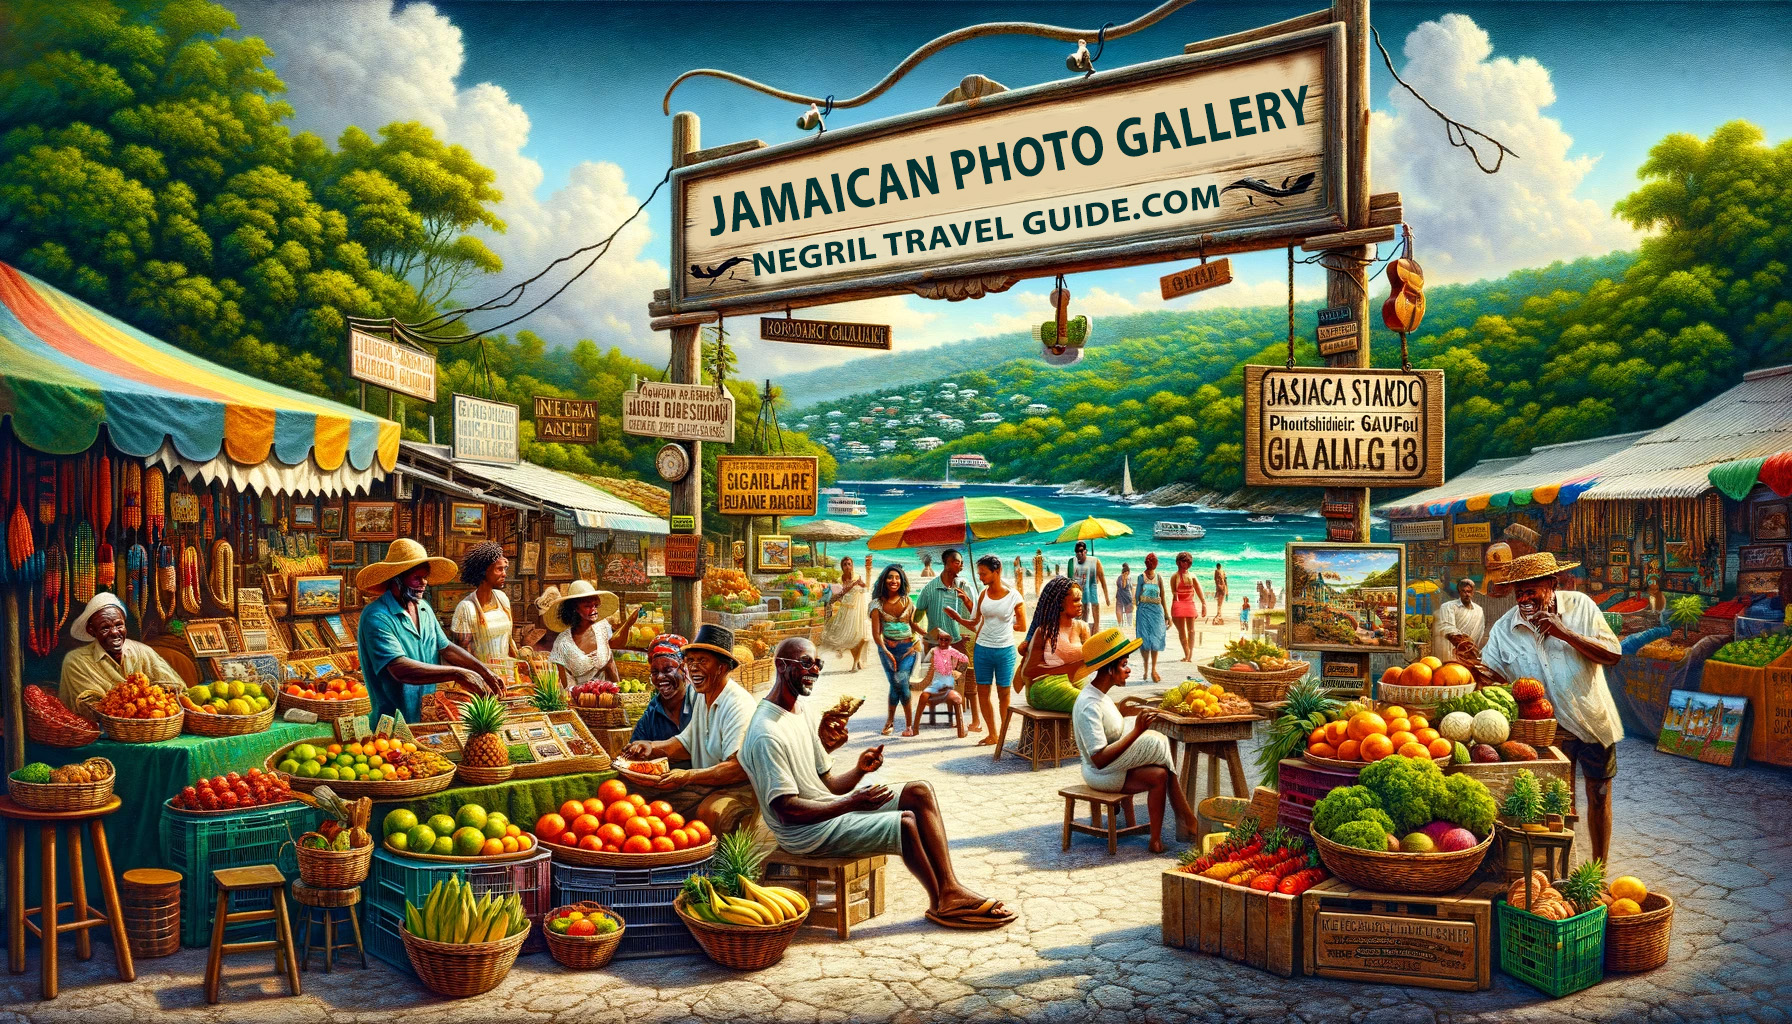 Jamaican Photo Gallery - Negril Travel Guide